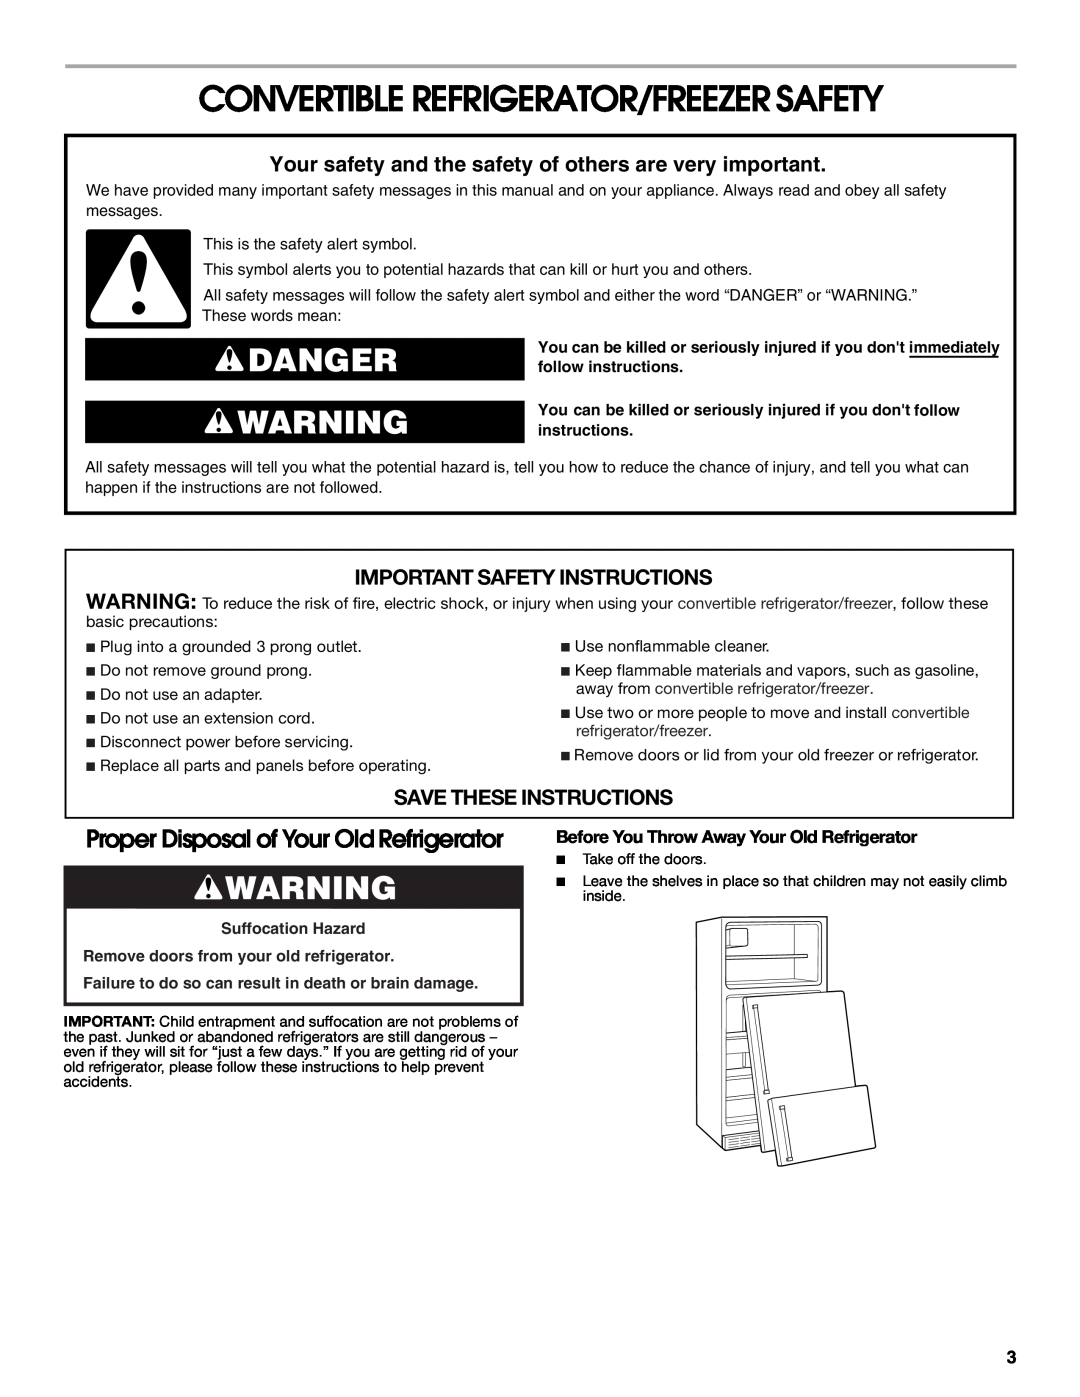 Whirlpool 2314466 manual Convertible Refrigerator/Freezer Safety, Danger, Proper Disposal of Your Old Refrigerator 